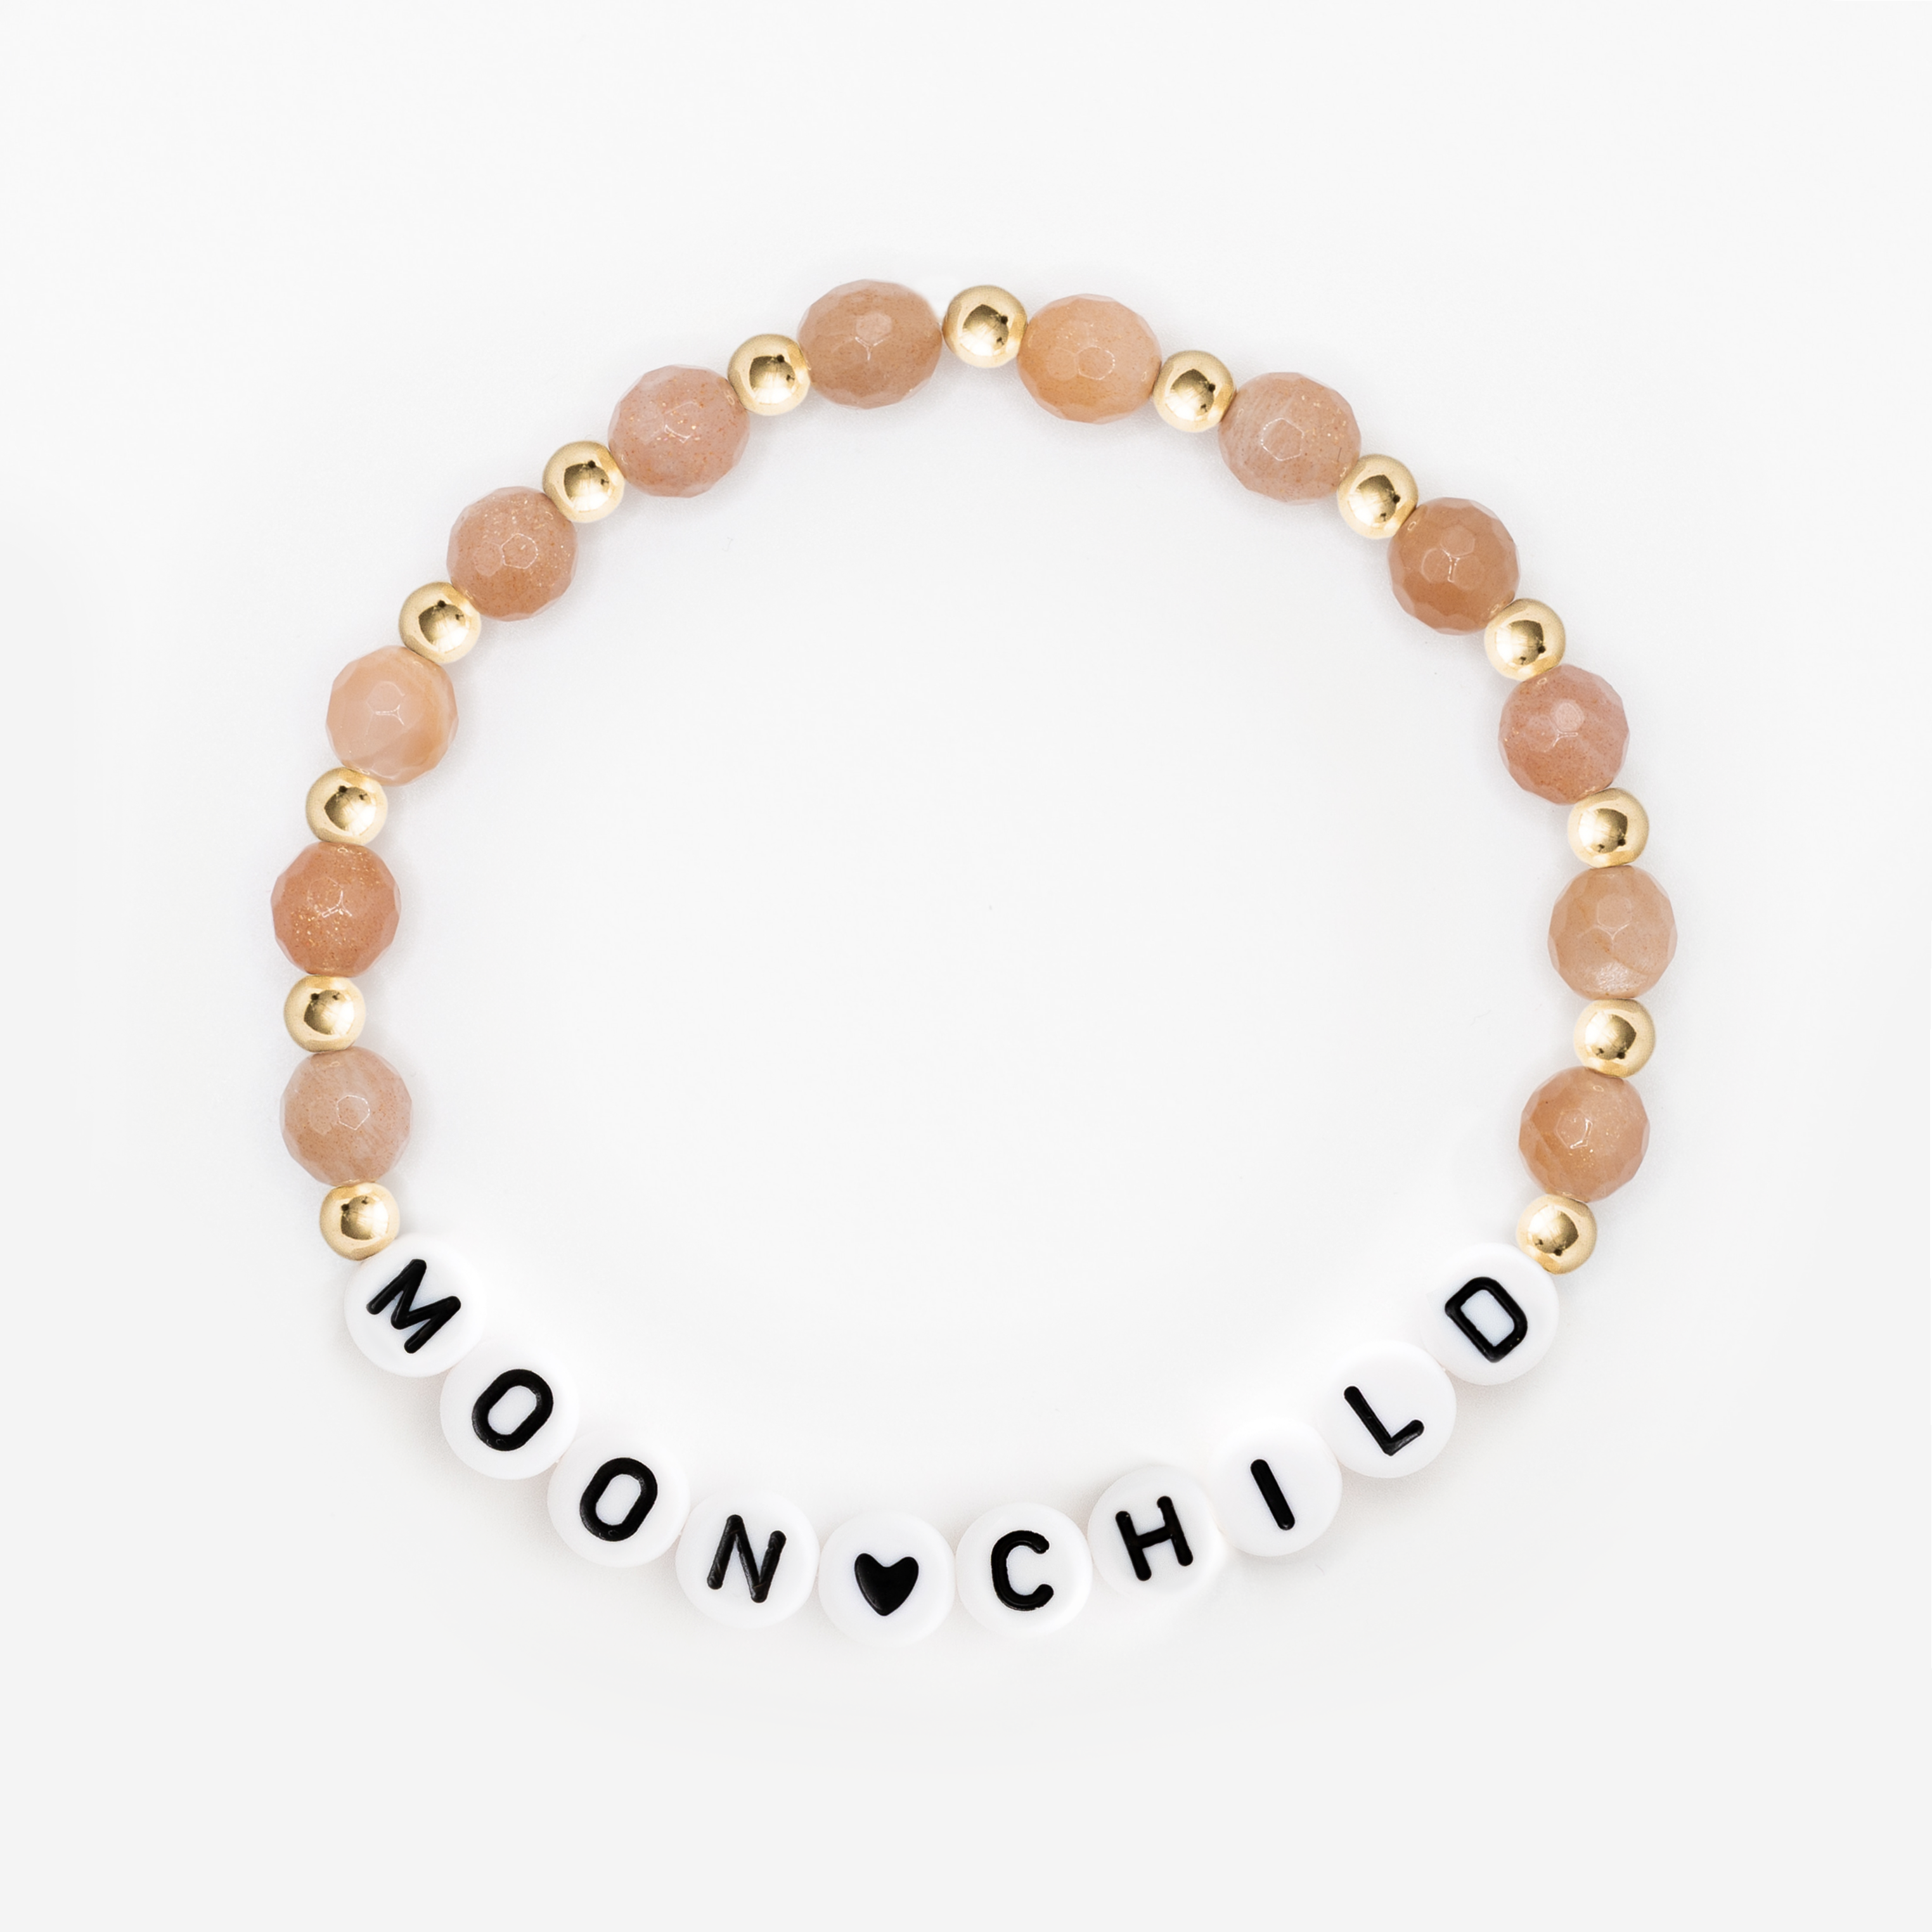 Timeless Baby Name Bracelets for girls with genuine birthstones